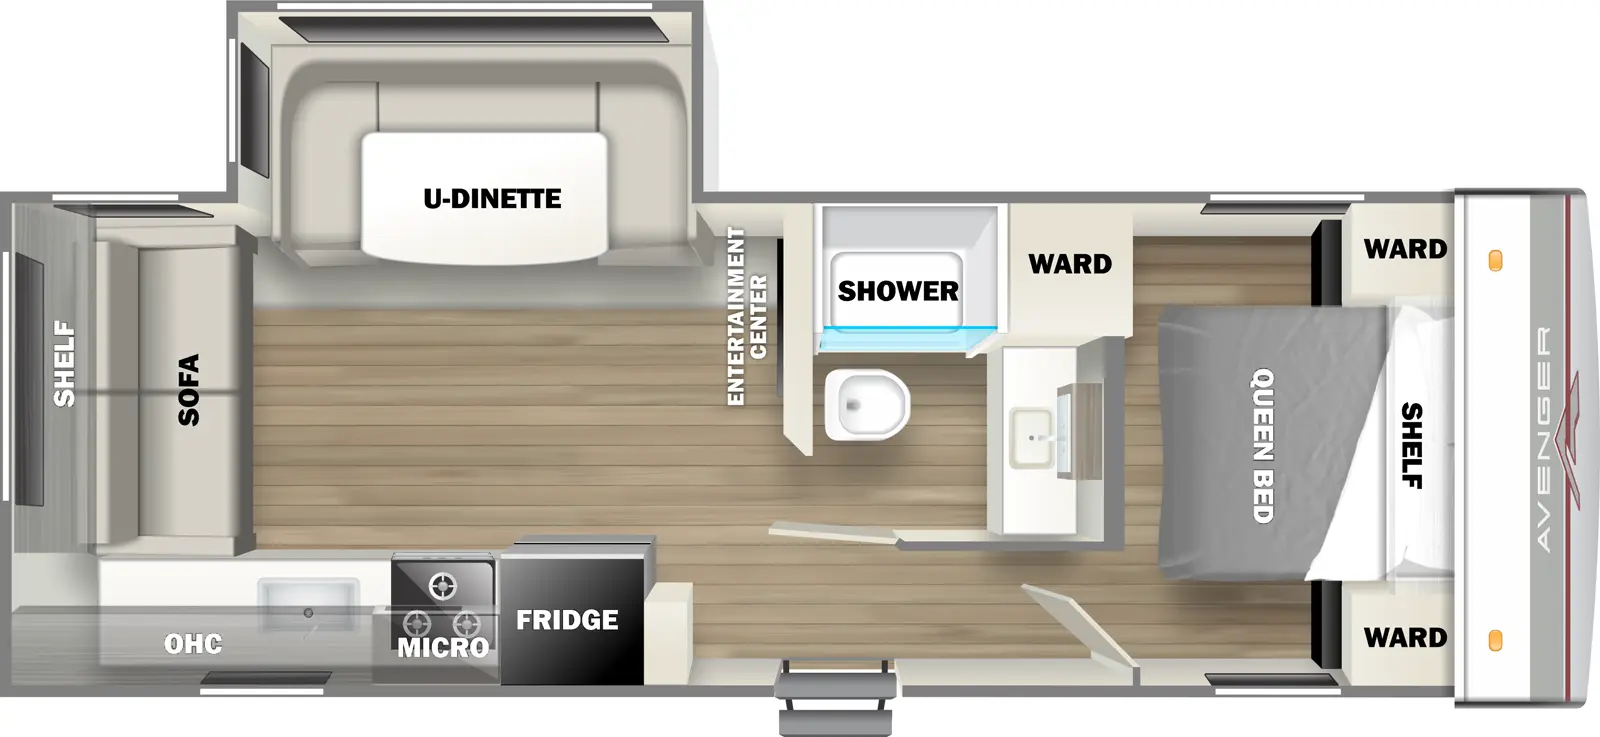 The 24RLSLE has one slideout and one entry. Interior layout front to back: foot facing queen bed with shelf above, wardrobes on each side, and off-door side wardrobe; off-door side full bathroom with entry door across from it; entertainment center along inner wall; off-door side u-dinette slideout; door side refrigerator, microwave, cooktop, overhead cabinet, kitchen counter and sink; rear sofa with shelf above.